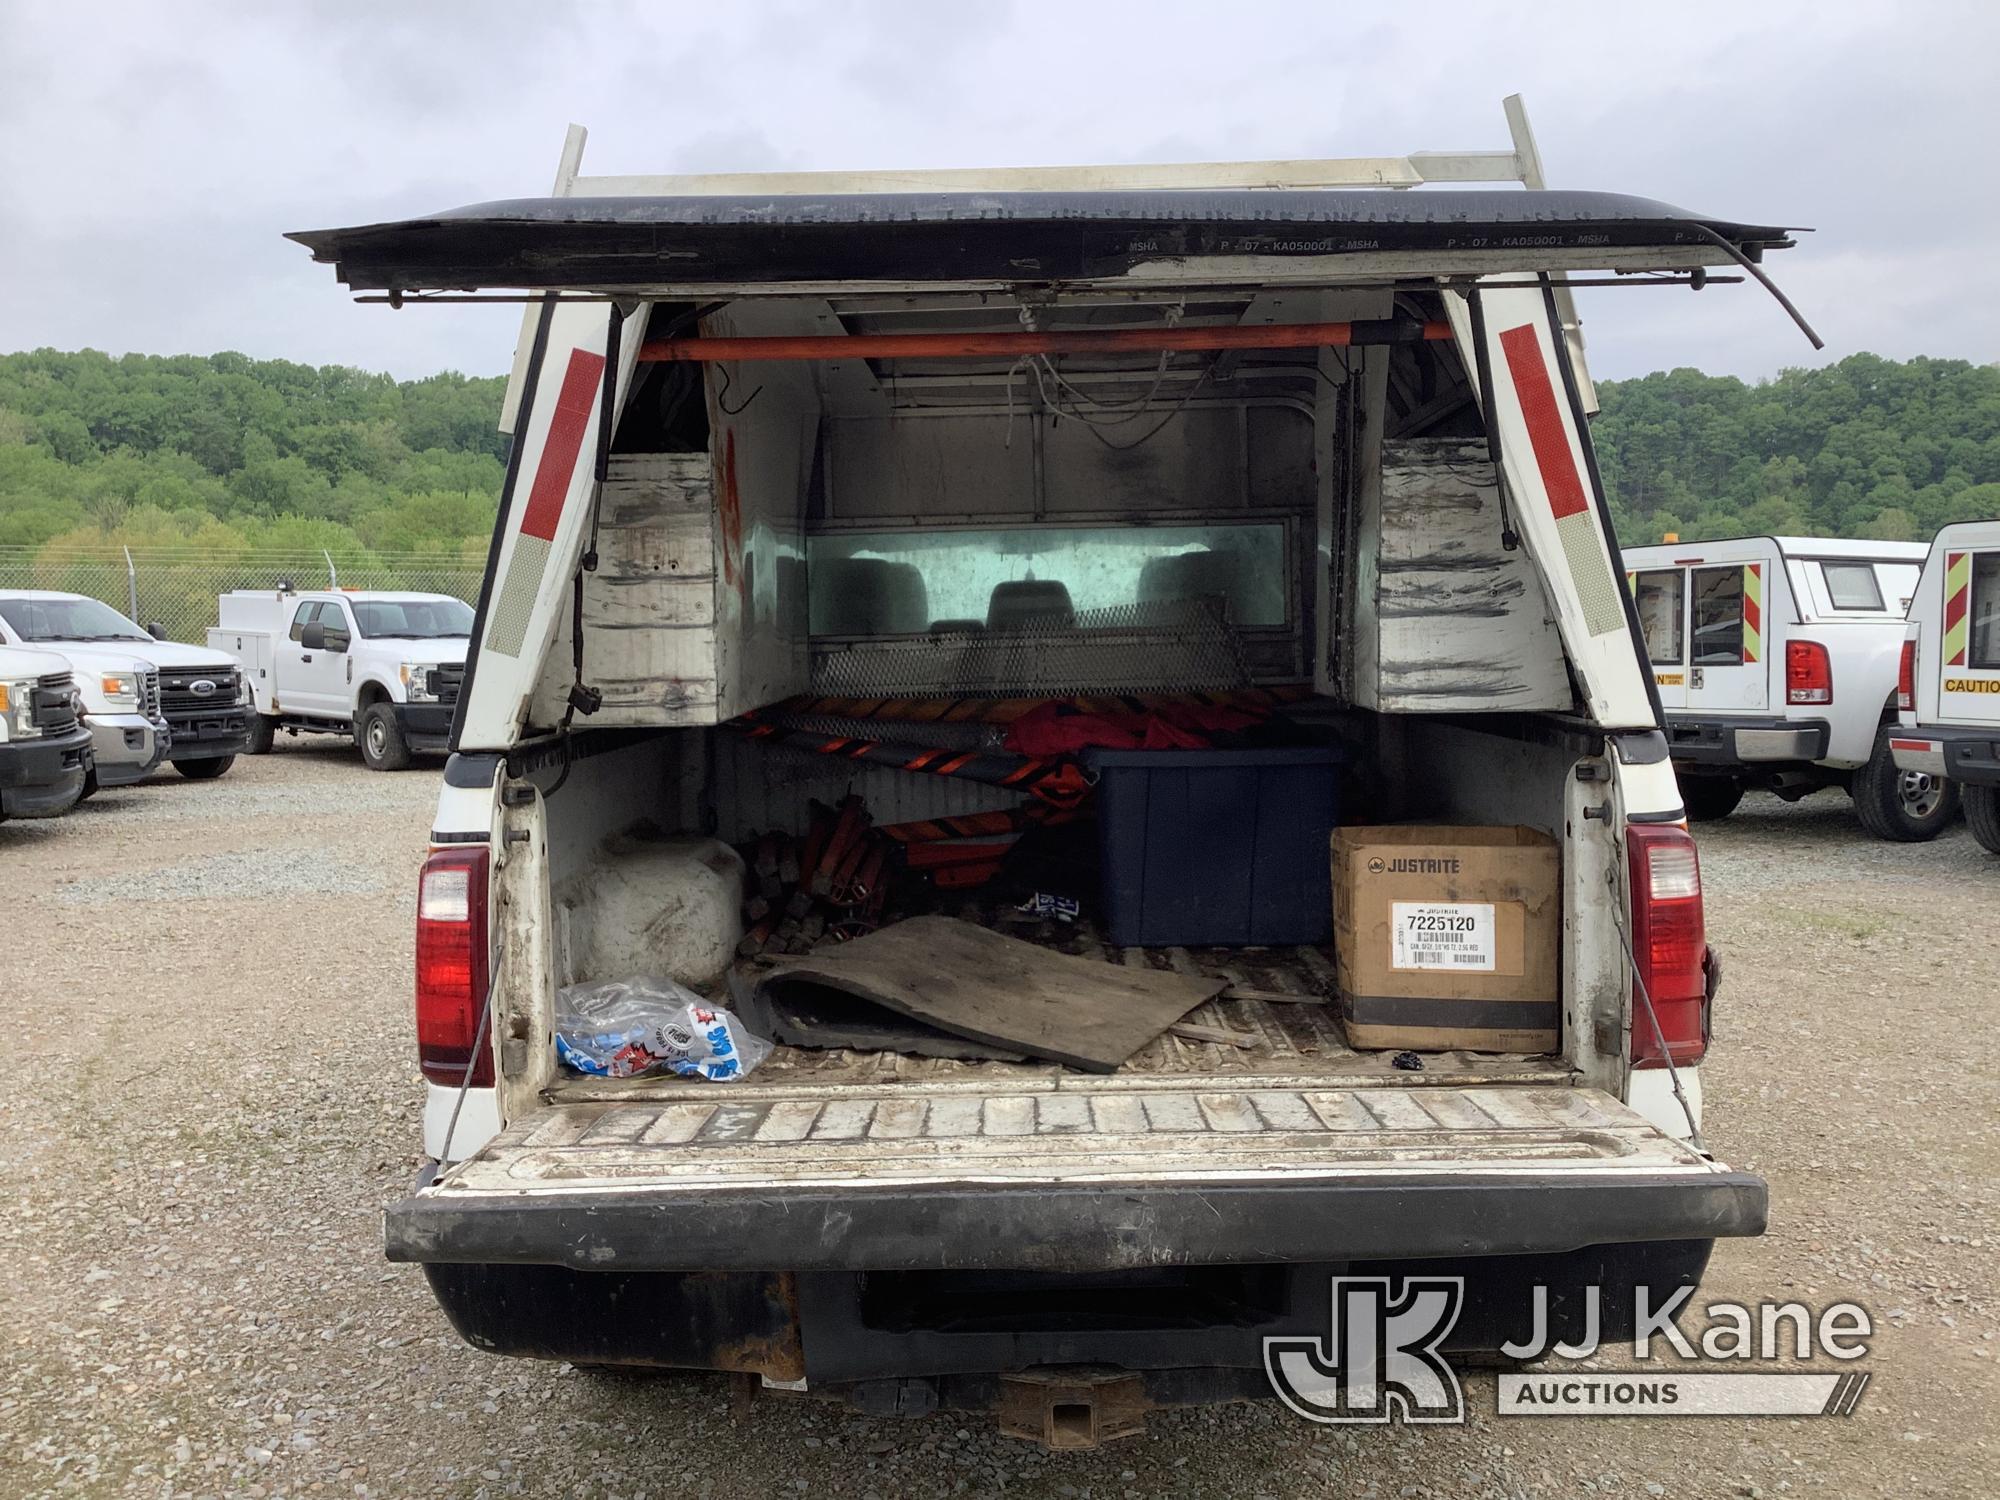 (Smock, PA) 2015 Ford F250 4x4 Crew-Cab Pickup Truck Runs Rough, Moves In 4WD Only, Engine Knock, Ch